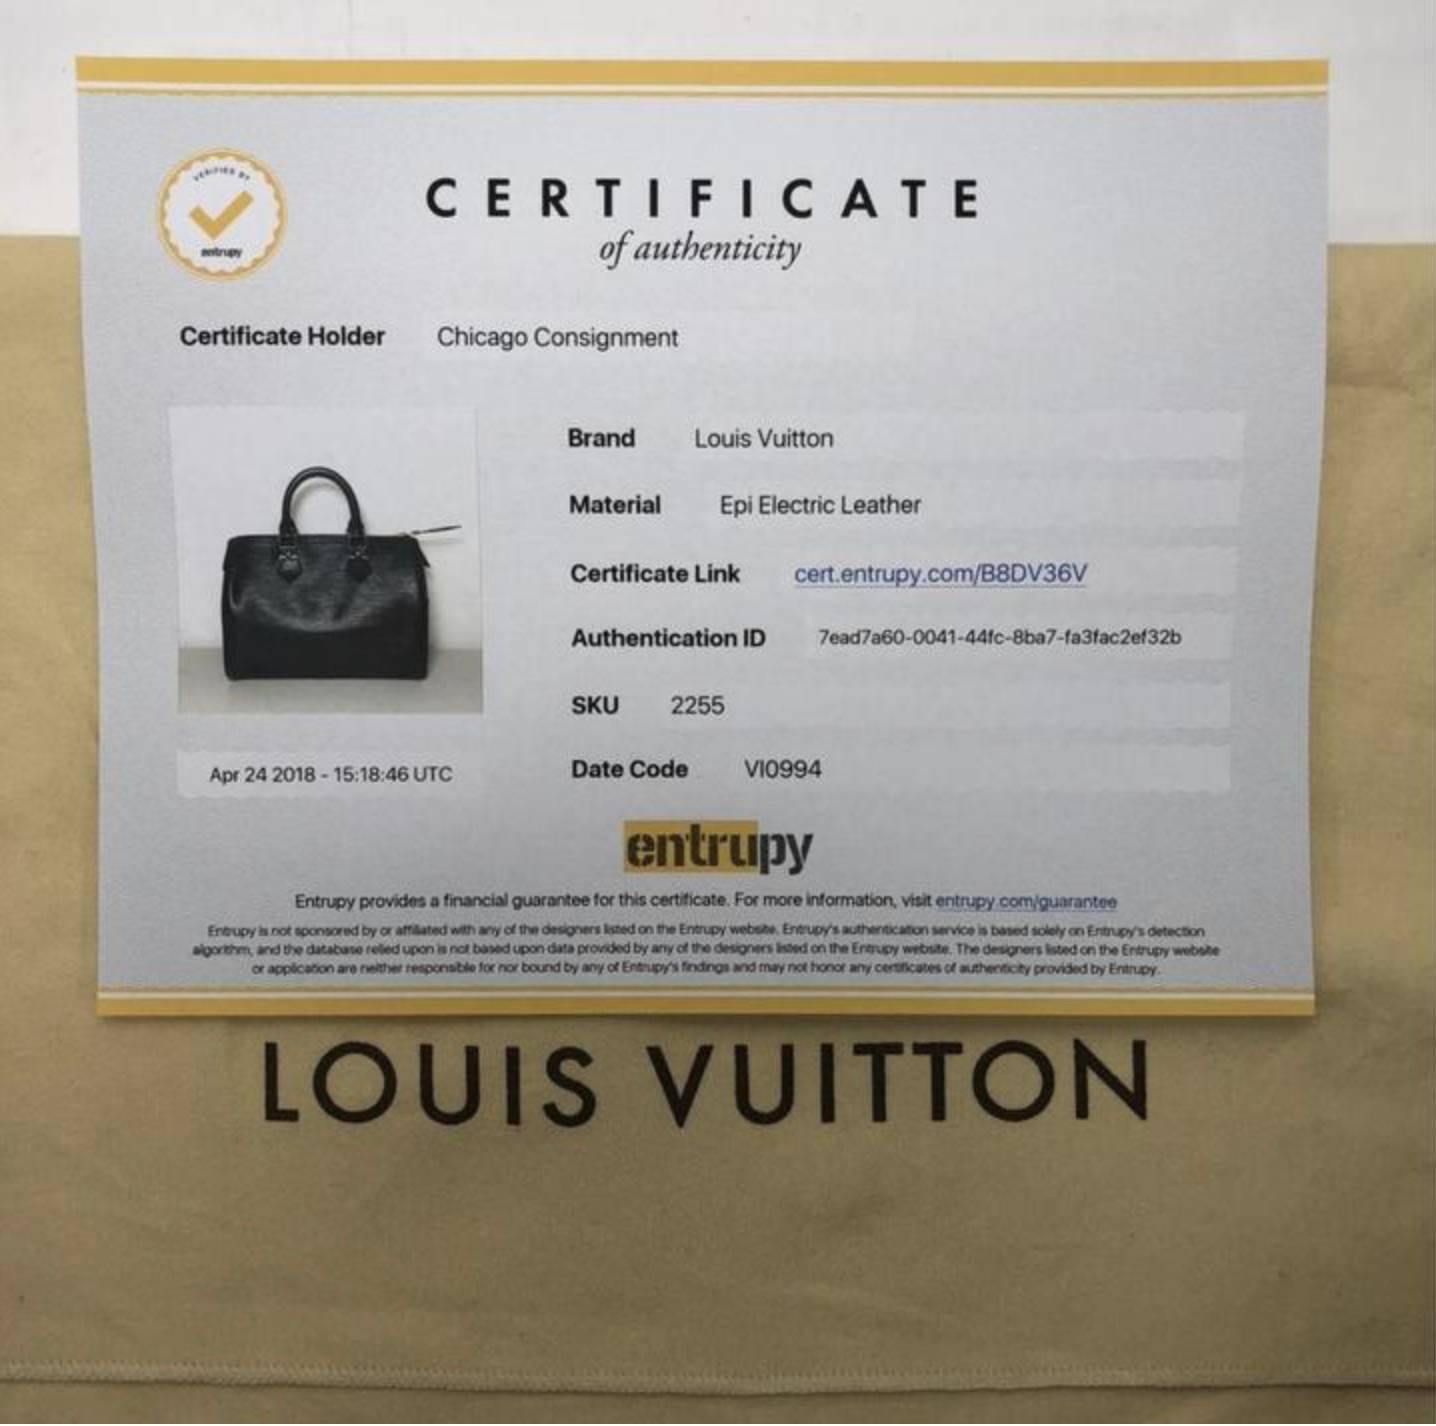 MODEL - Louis Vuitton Epi Speedy 25 in Black

CONDITION - Very Good.  Clean.  No rips, holes, tears, stains or odors.  Pieces maintains original shape with no cracks but has one crease.  Hardware has some tarnishing and  chipping.  Zipper slides